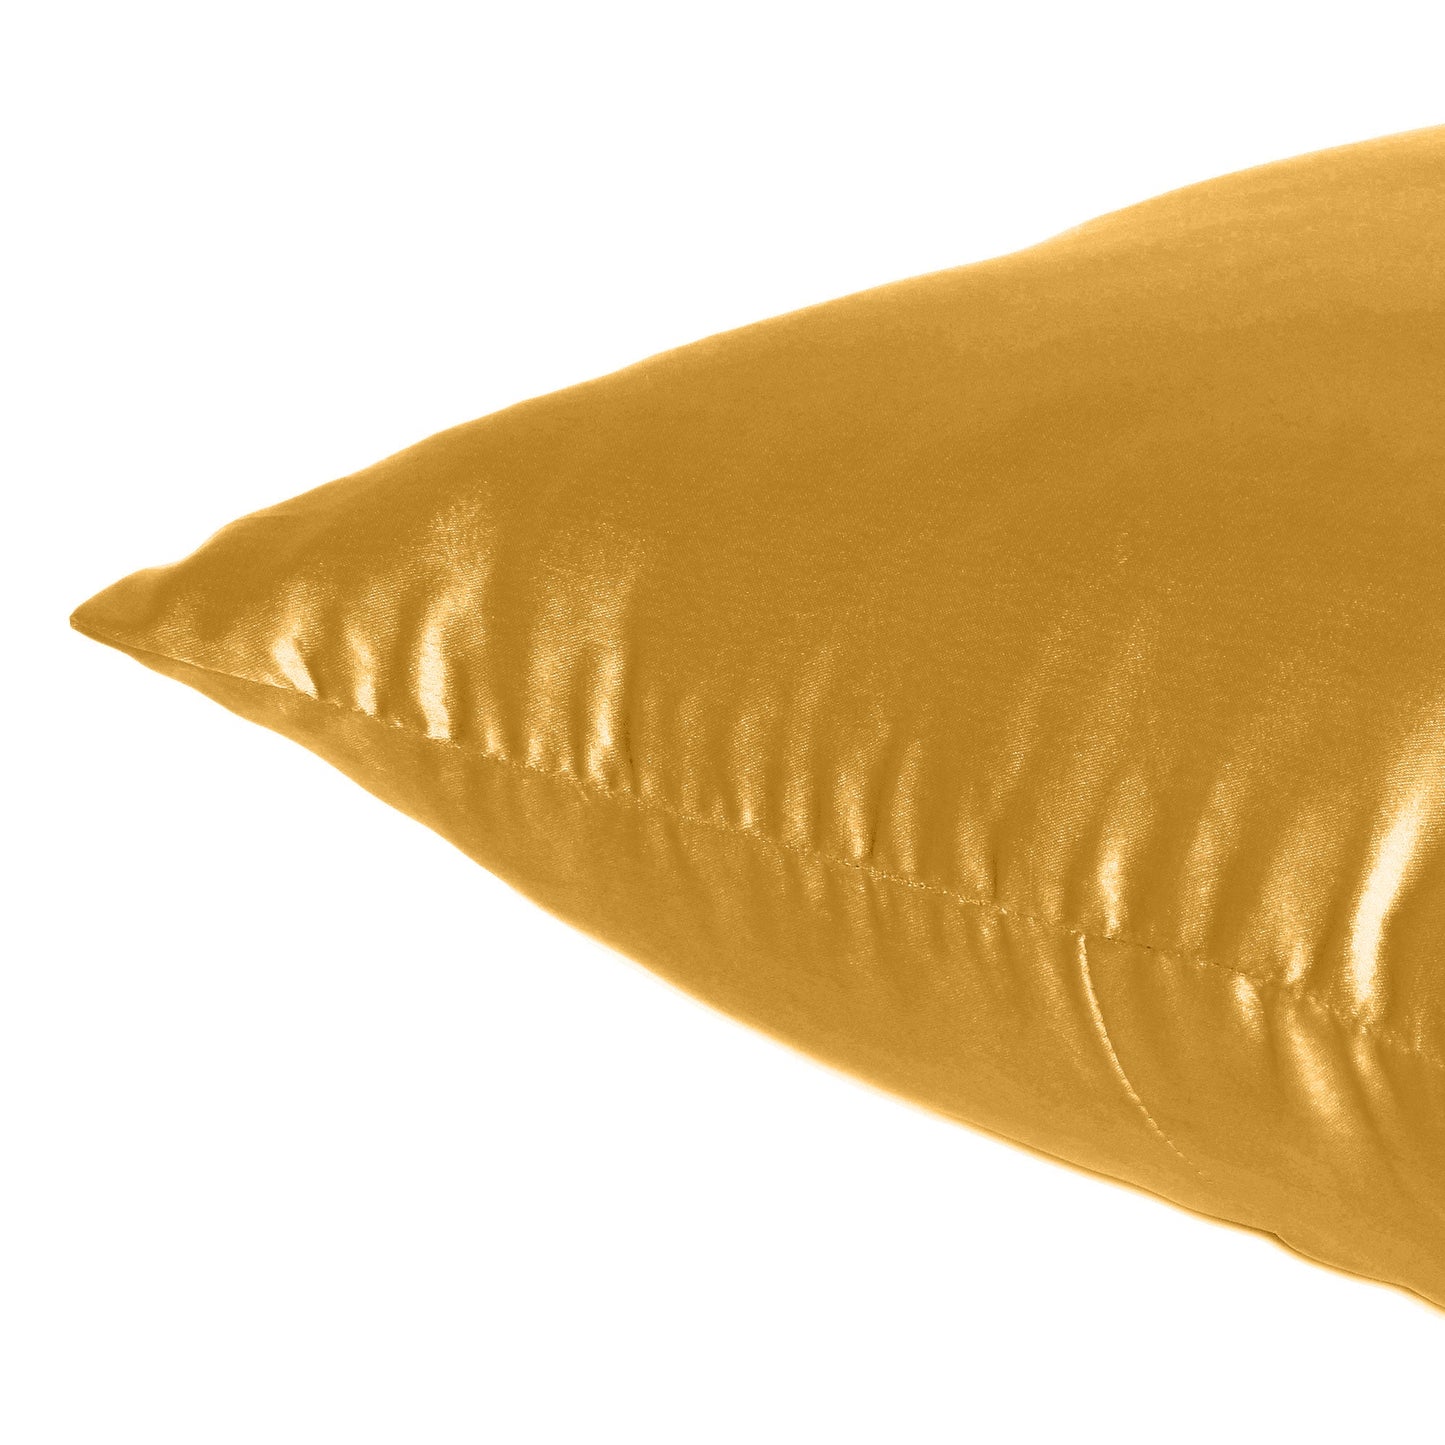 Apricot Tan Satin Silky Cushion Covers in Set of 2